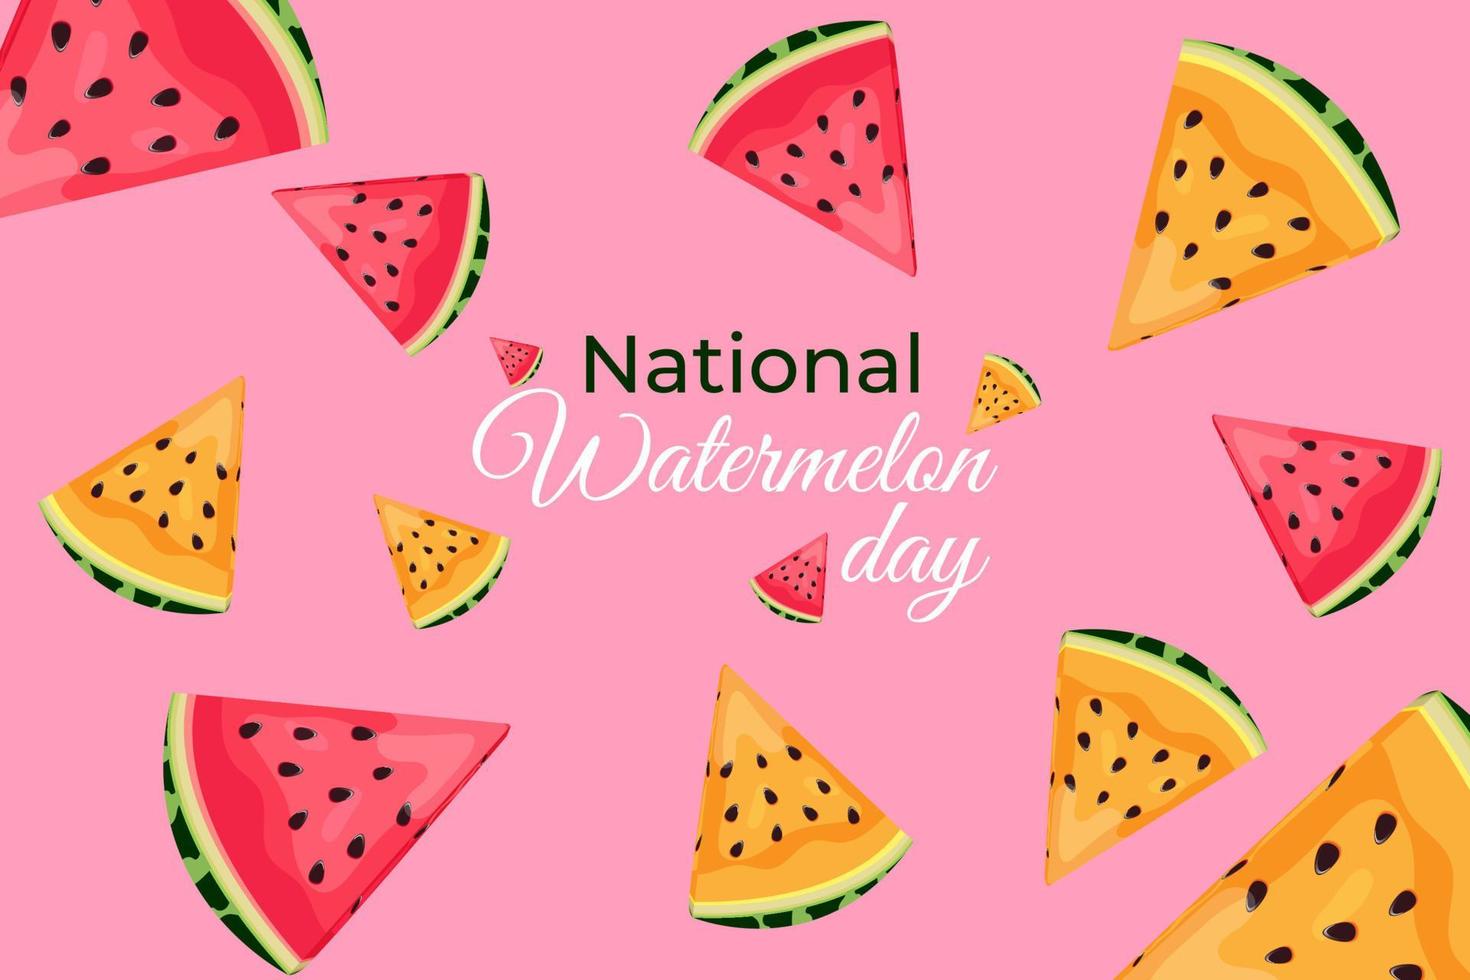 watermelon day. August 3rd. world watermelon day. national watermelon day. beautiful watermelon banner on a pink background. watermelon slices. juicy background vector